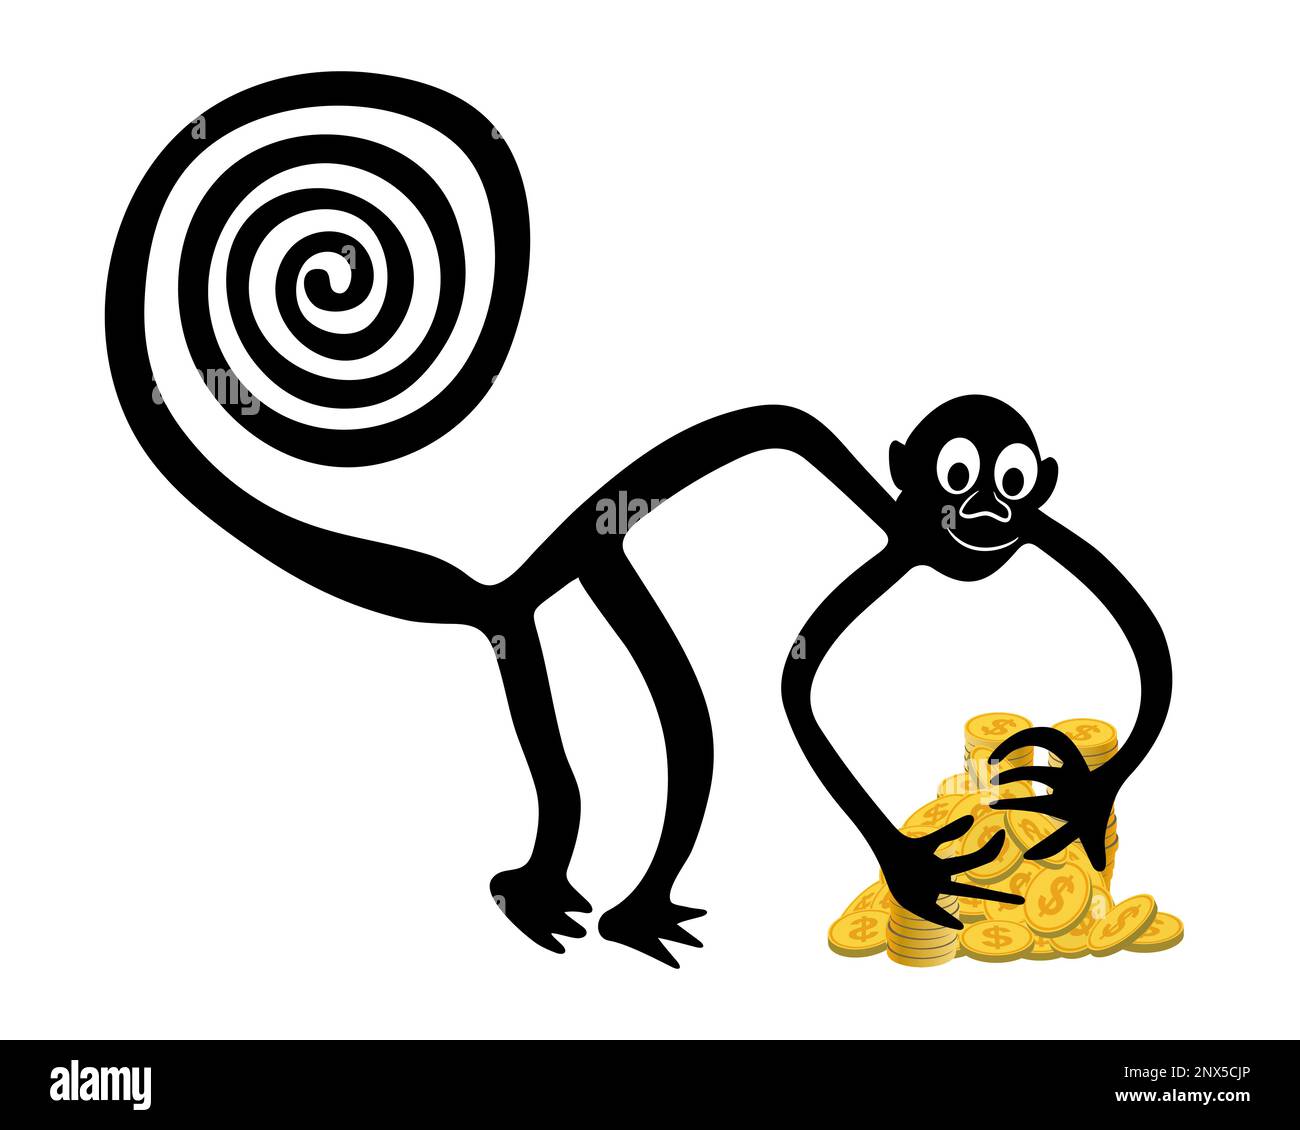 Monkey with a pile of golden coins Stock Vector